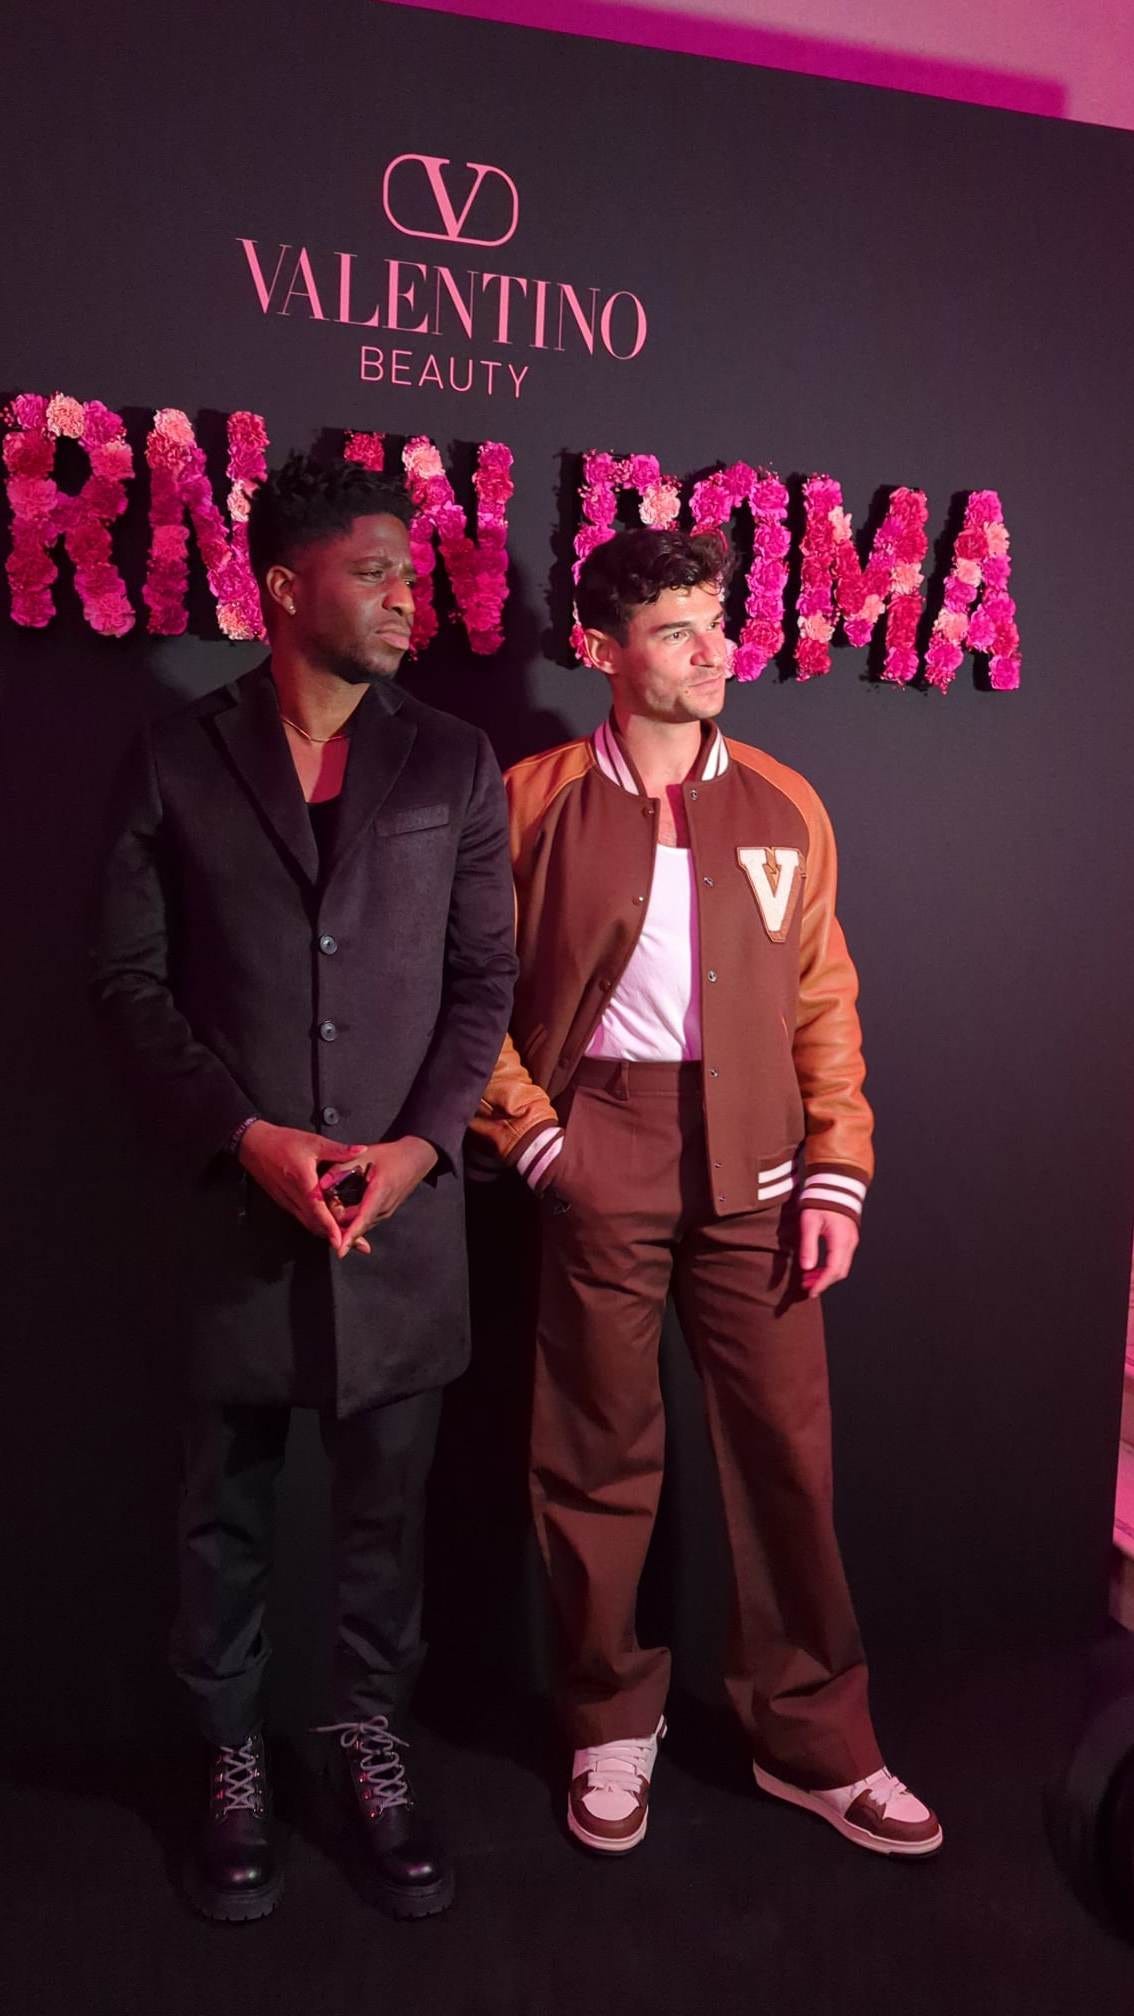 Valentino Uomo and Donna Born in Roma Intense: A New Chapter for Roman  Nights